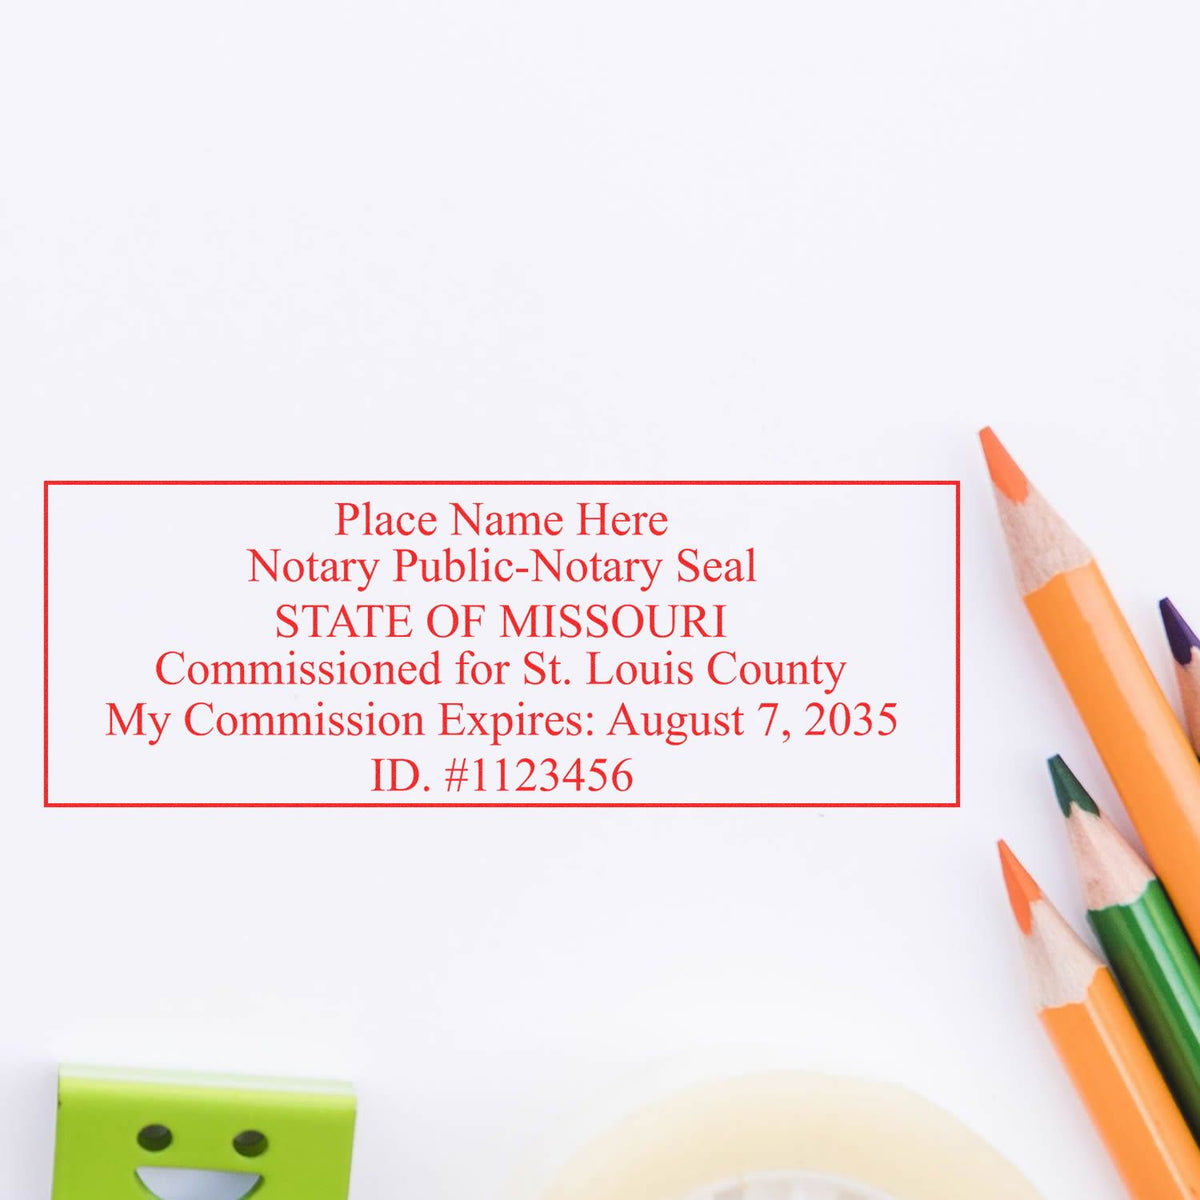 The Self-Inking Rectangular Missouri Notary Stamp stamp impression comes to life with a crisp, detailed photo on paper - showcasing true professional quality.